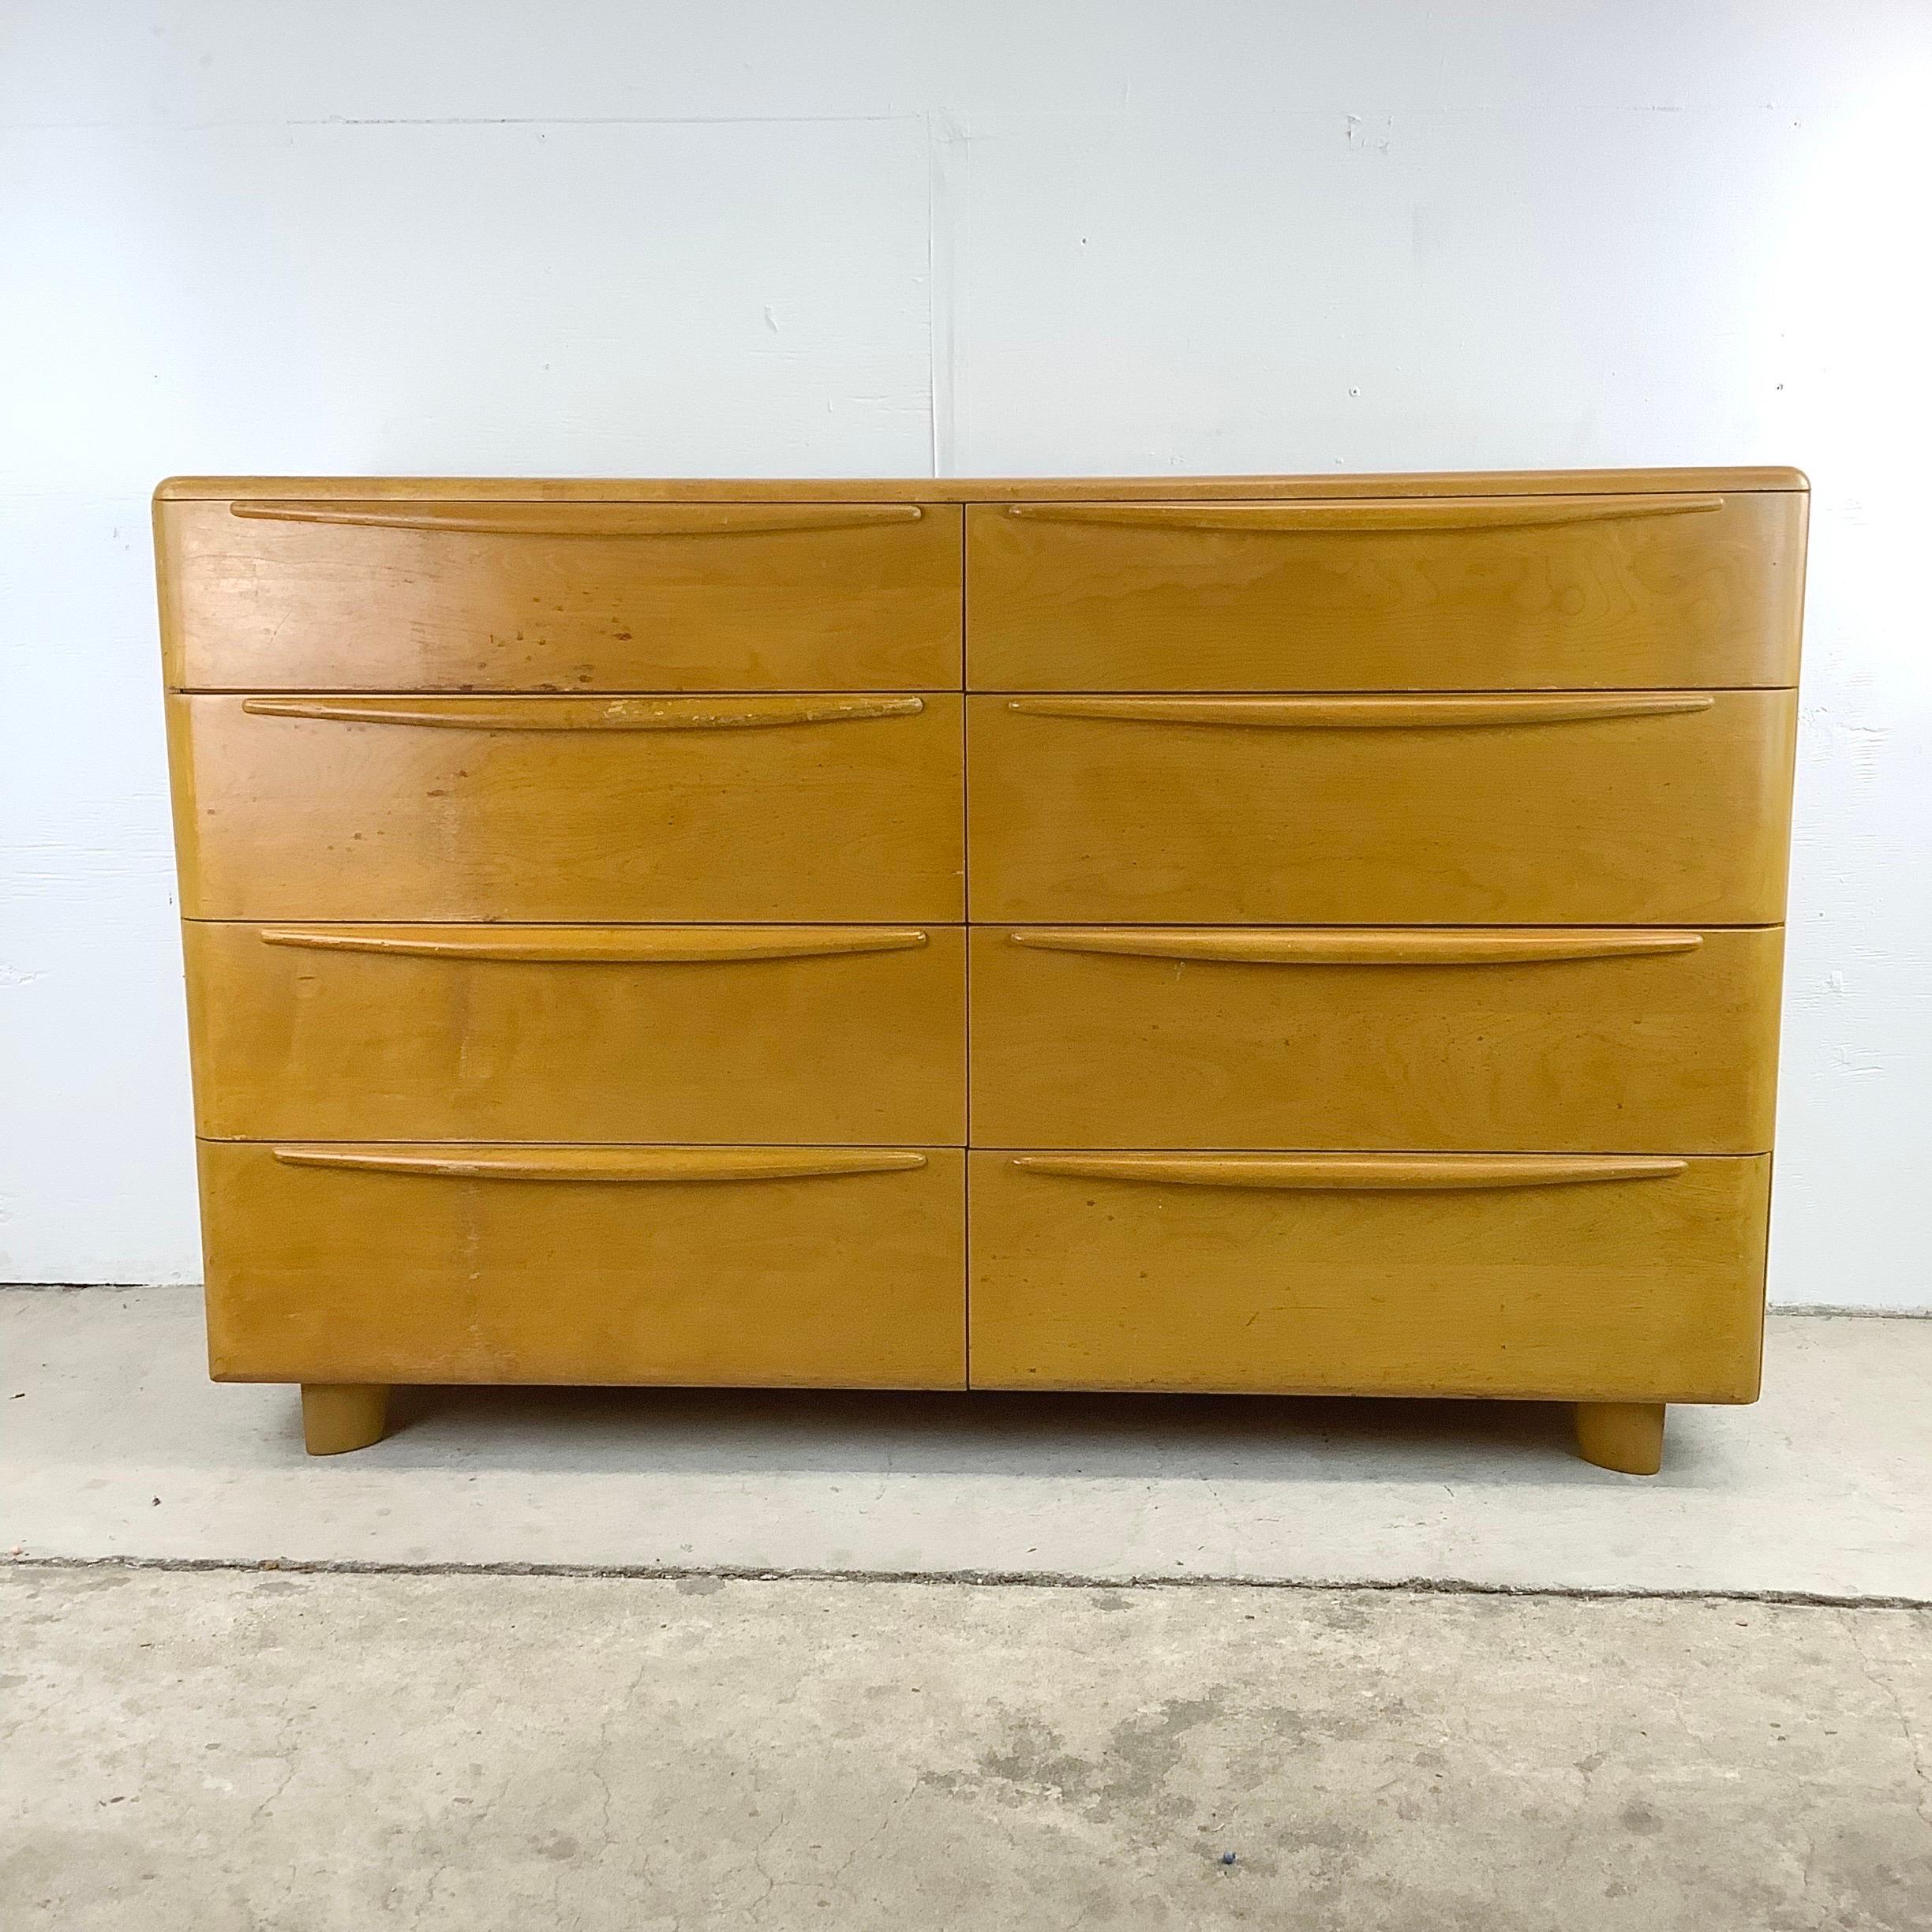 Introducing this vintage 1940s Heywood-Wakefield Eight Drawer Lowboy Dresser, a stunning piece in solid blonde wood construction thats ready to bring timeless beauty and functionality to your bedroom. This exceptional dresser mid-century dresser